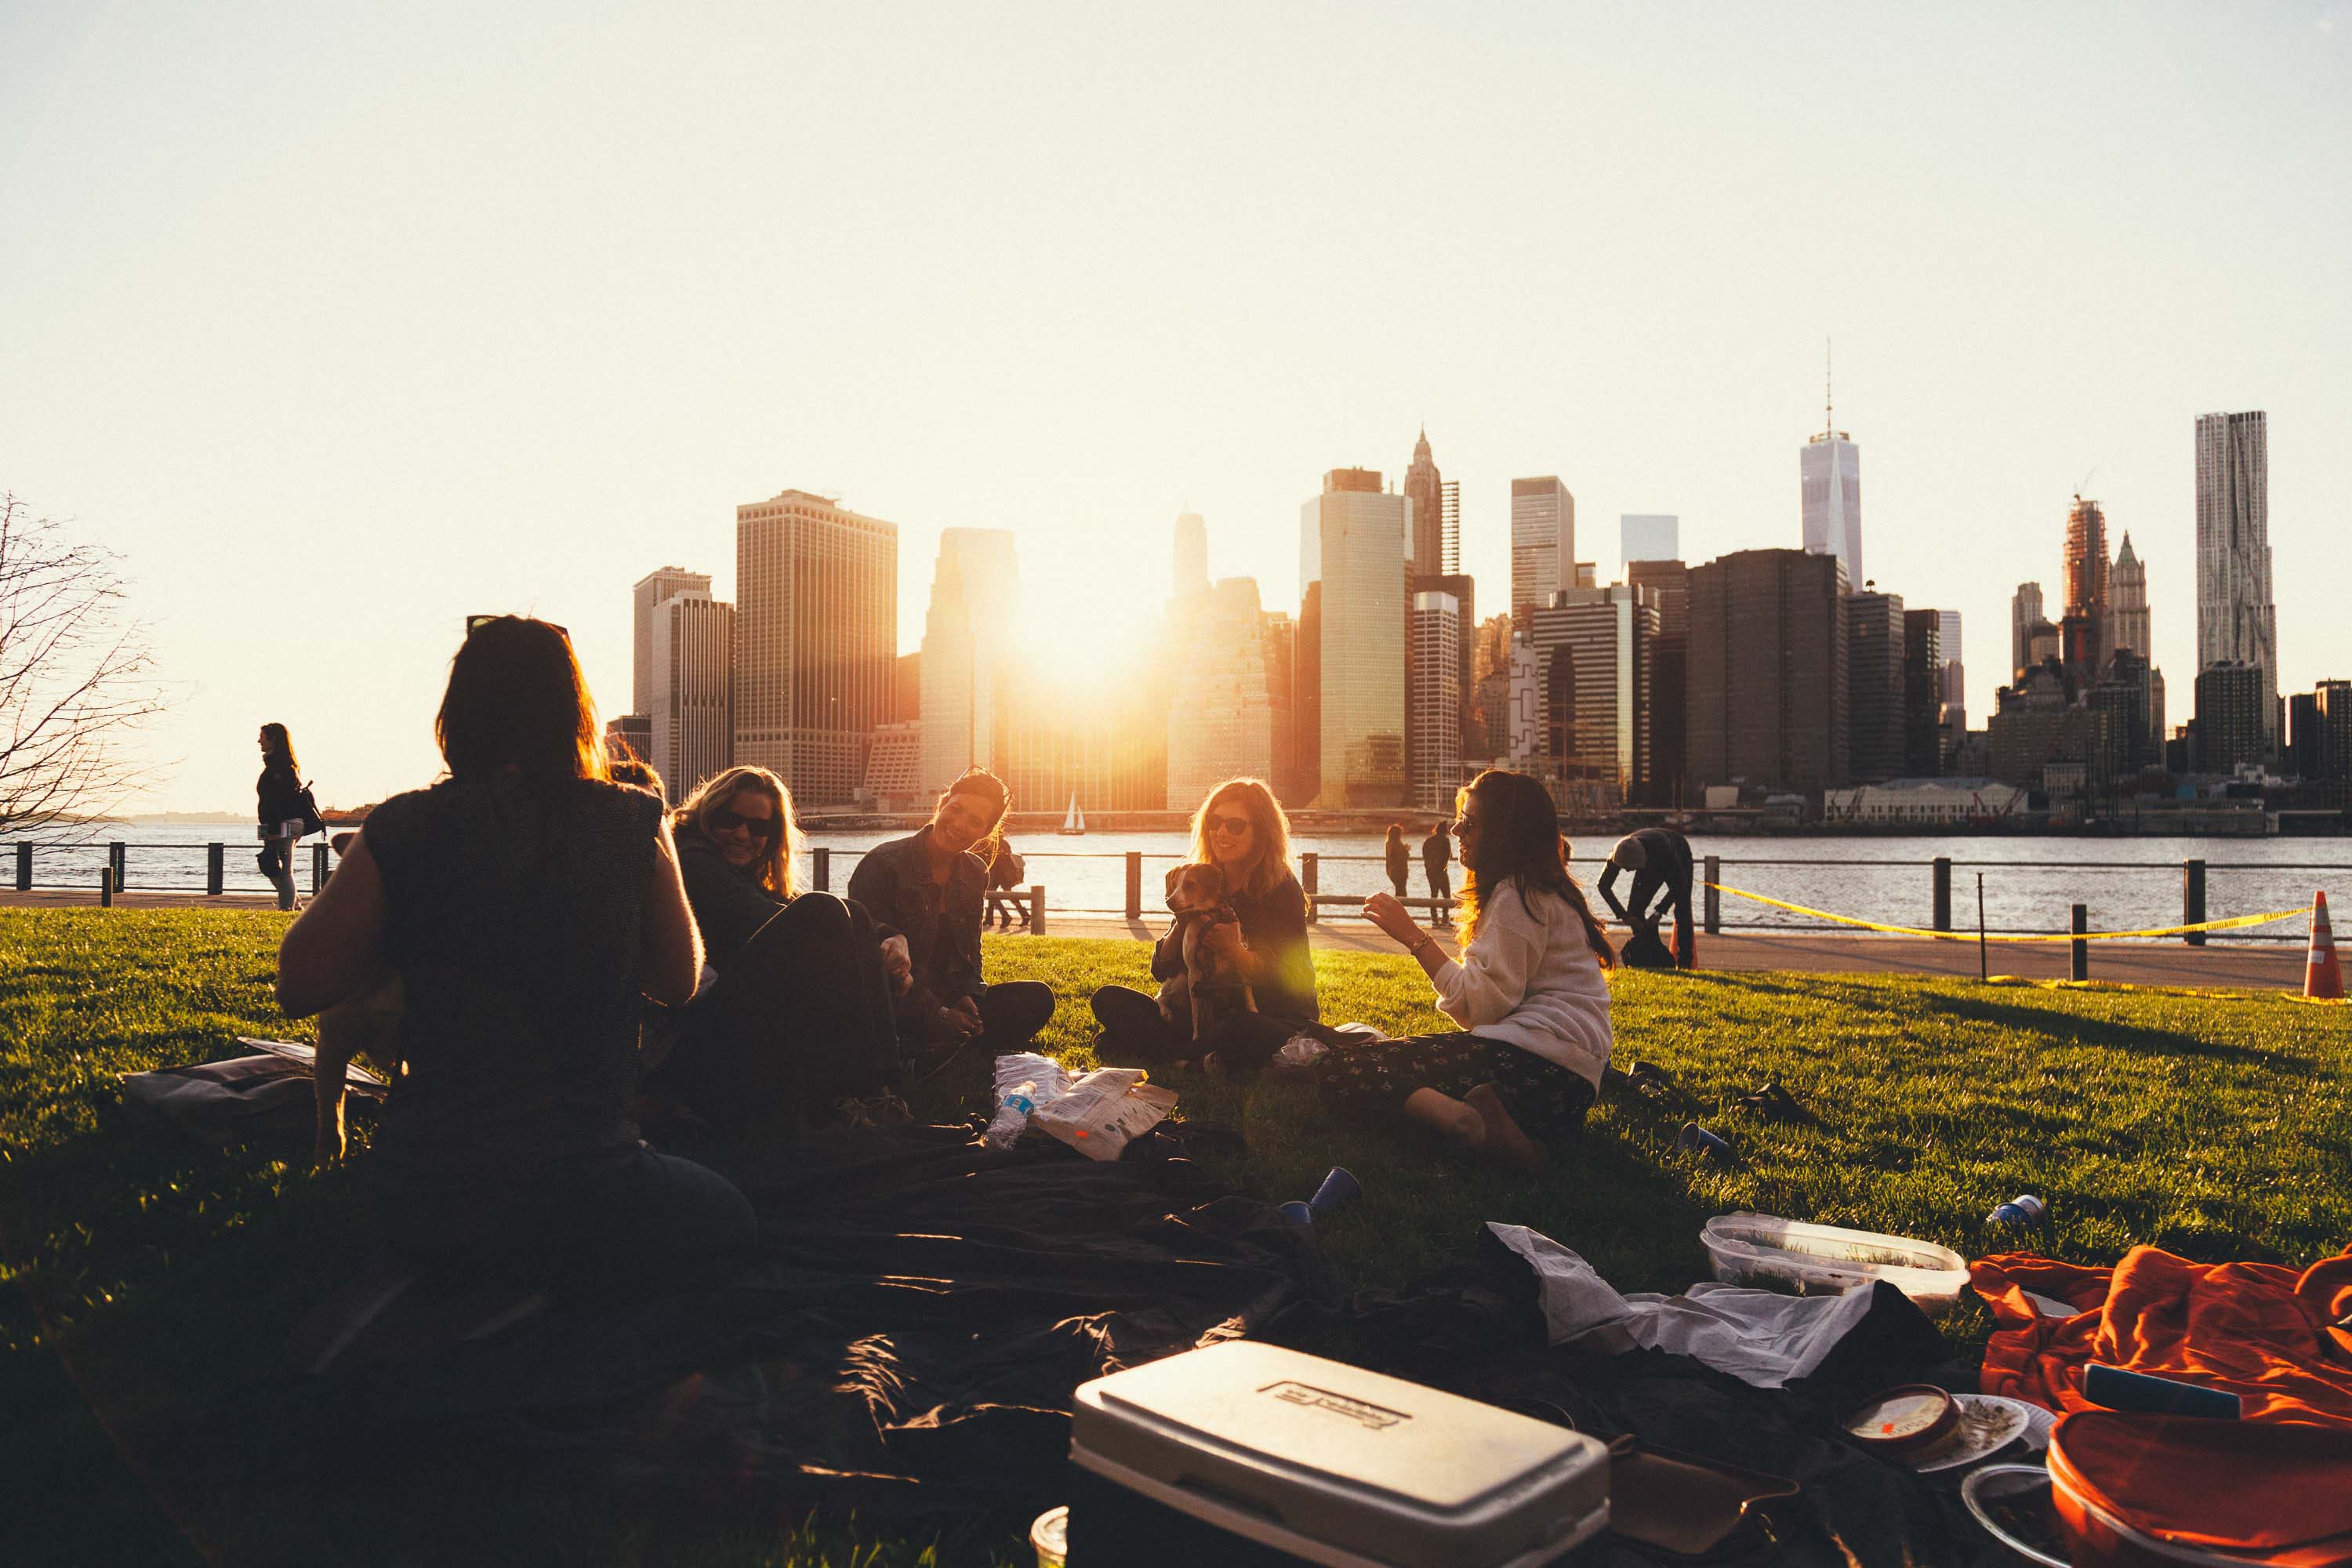 A group of 5 female friends are having a picnic on a grassy lawn. Two of the women have their dogs with them. In the background is a river and a city skyline, with the sun setting behind the buildings.